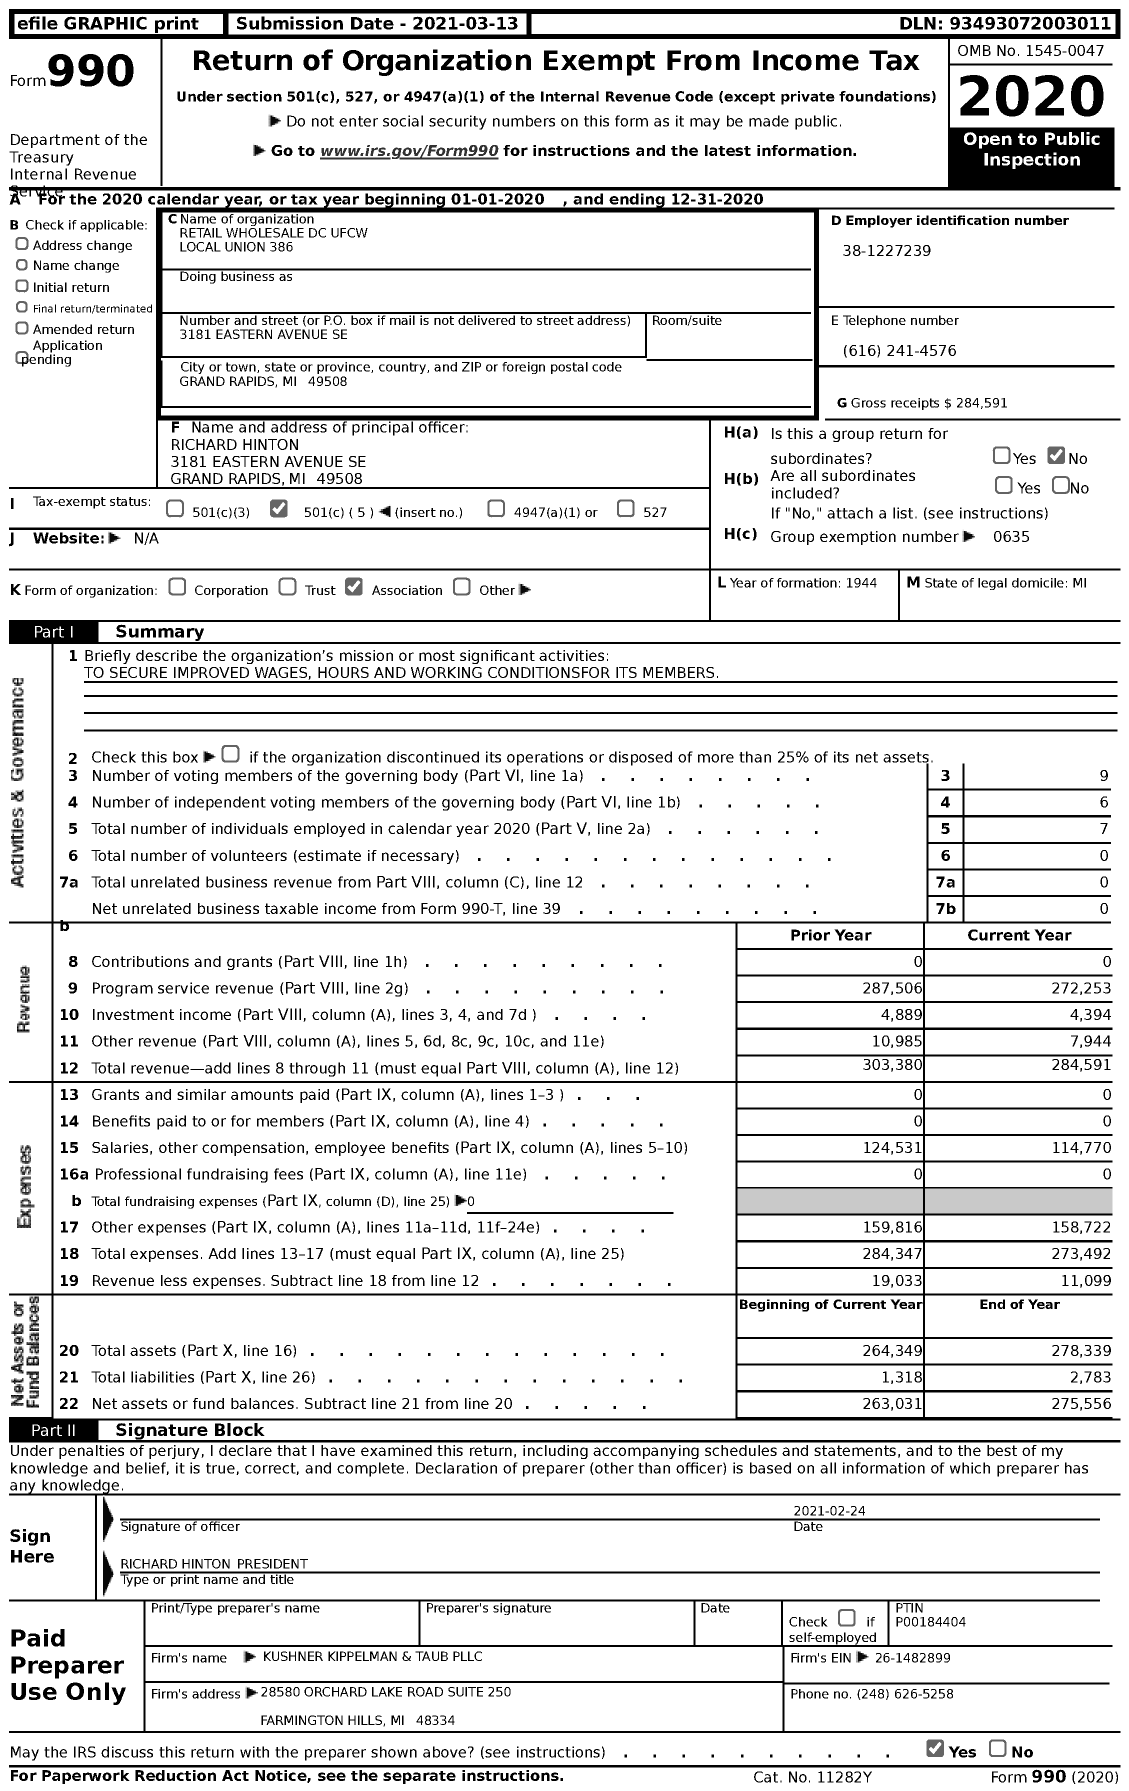 Image of first page of 2020 Form 990 for Retail Wholesale DC Ufcw Local Union 386